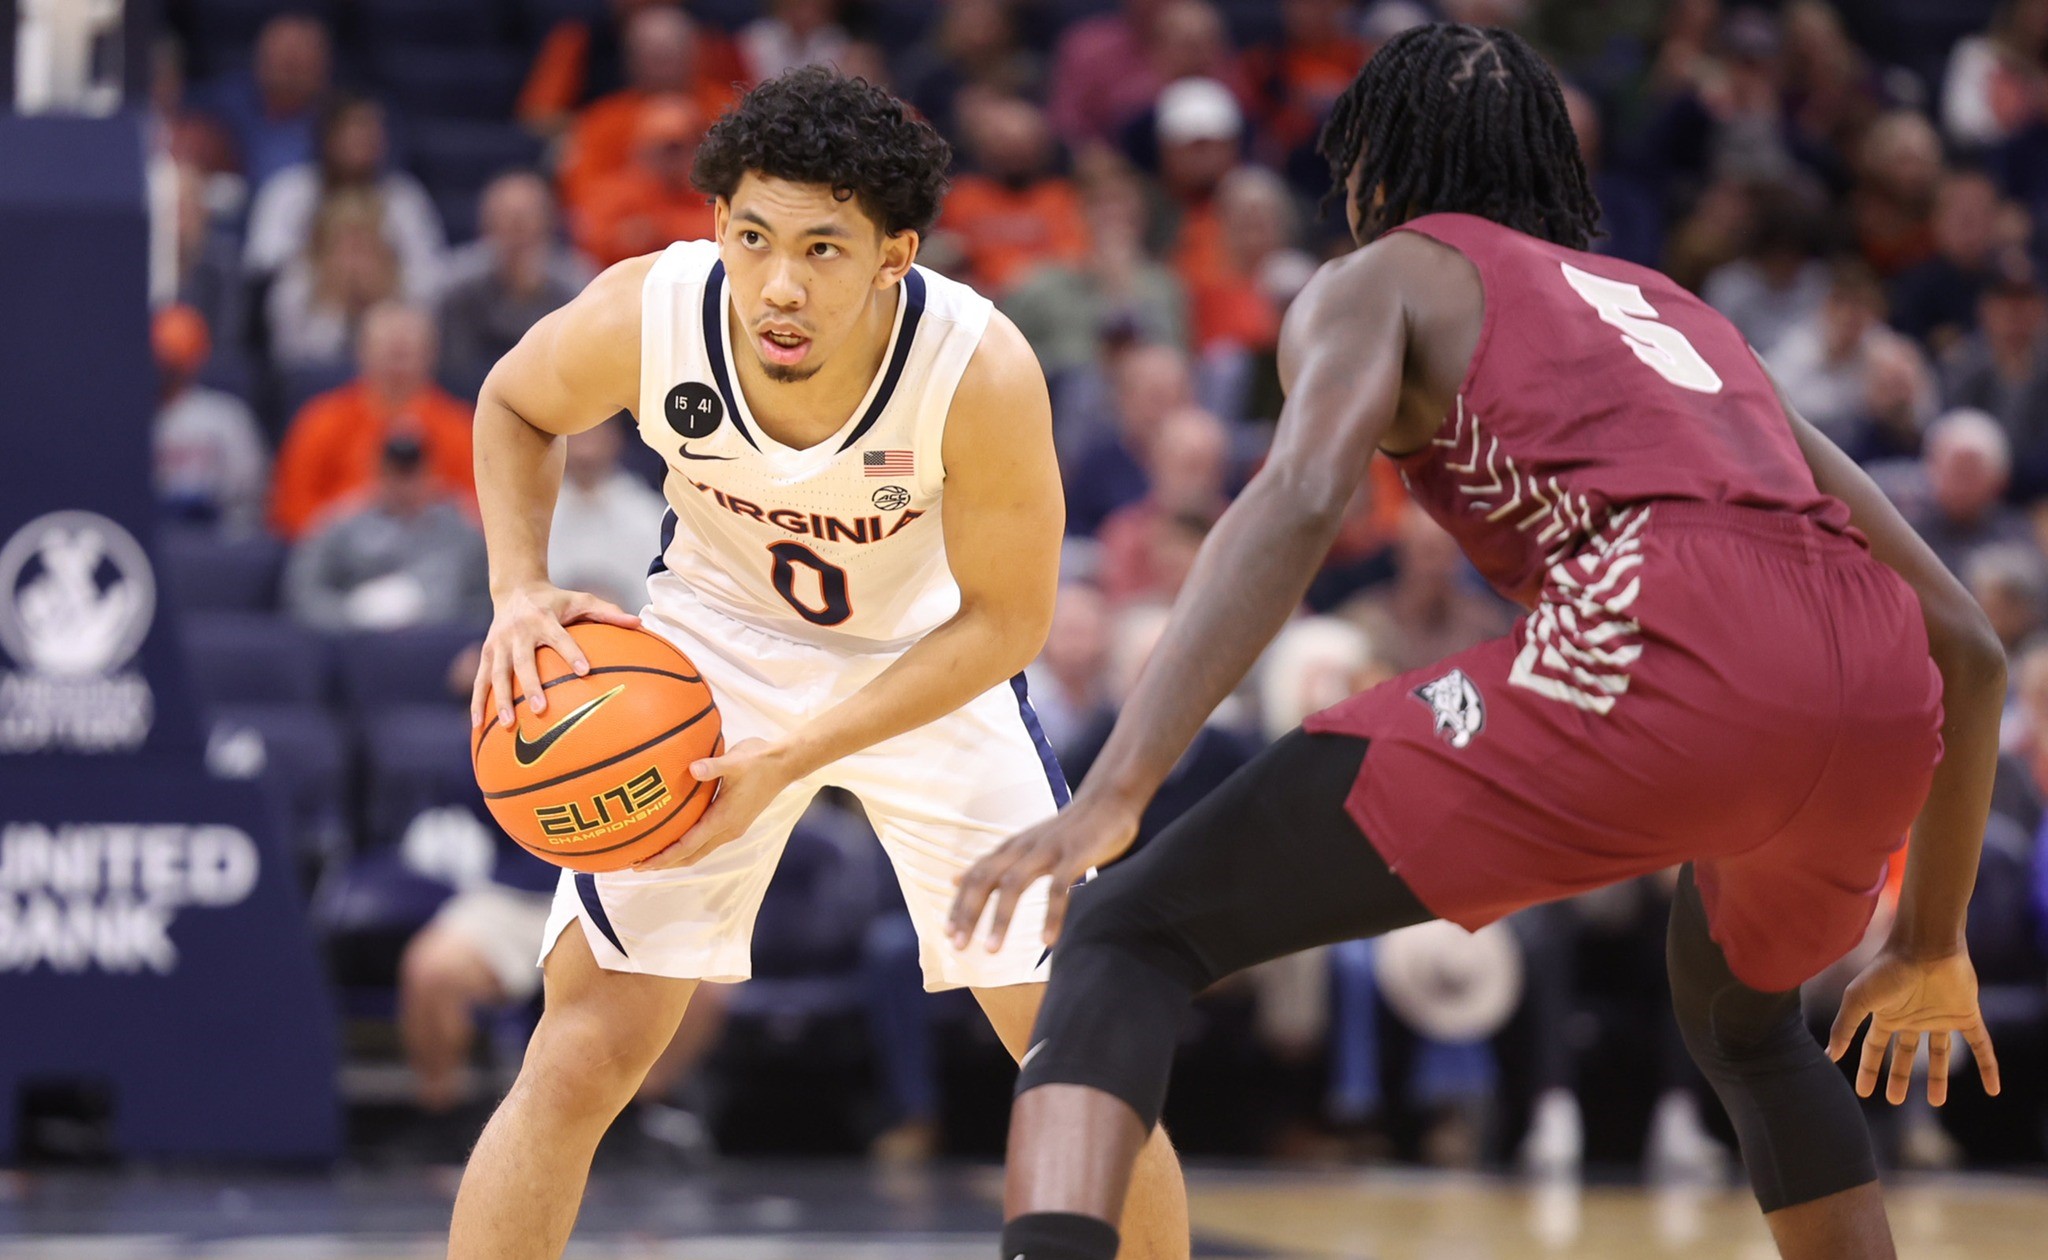 Virginia Basketball vs. Florida State | Scores and Live Updates